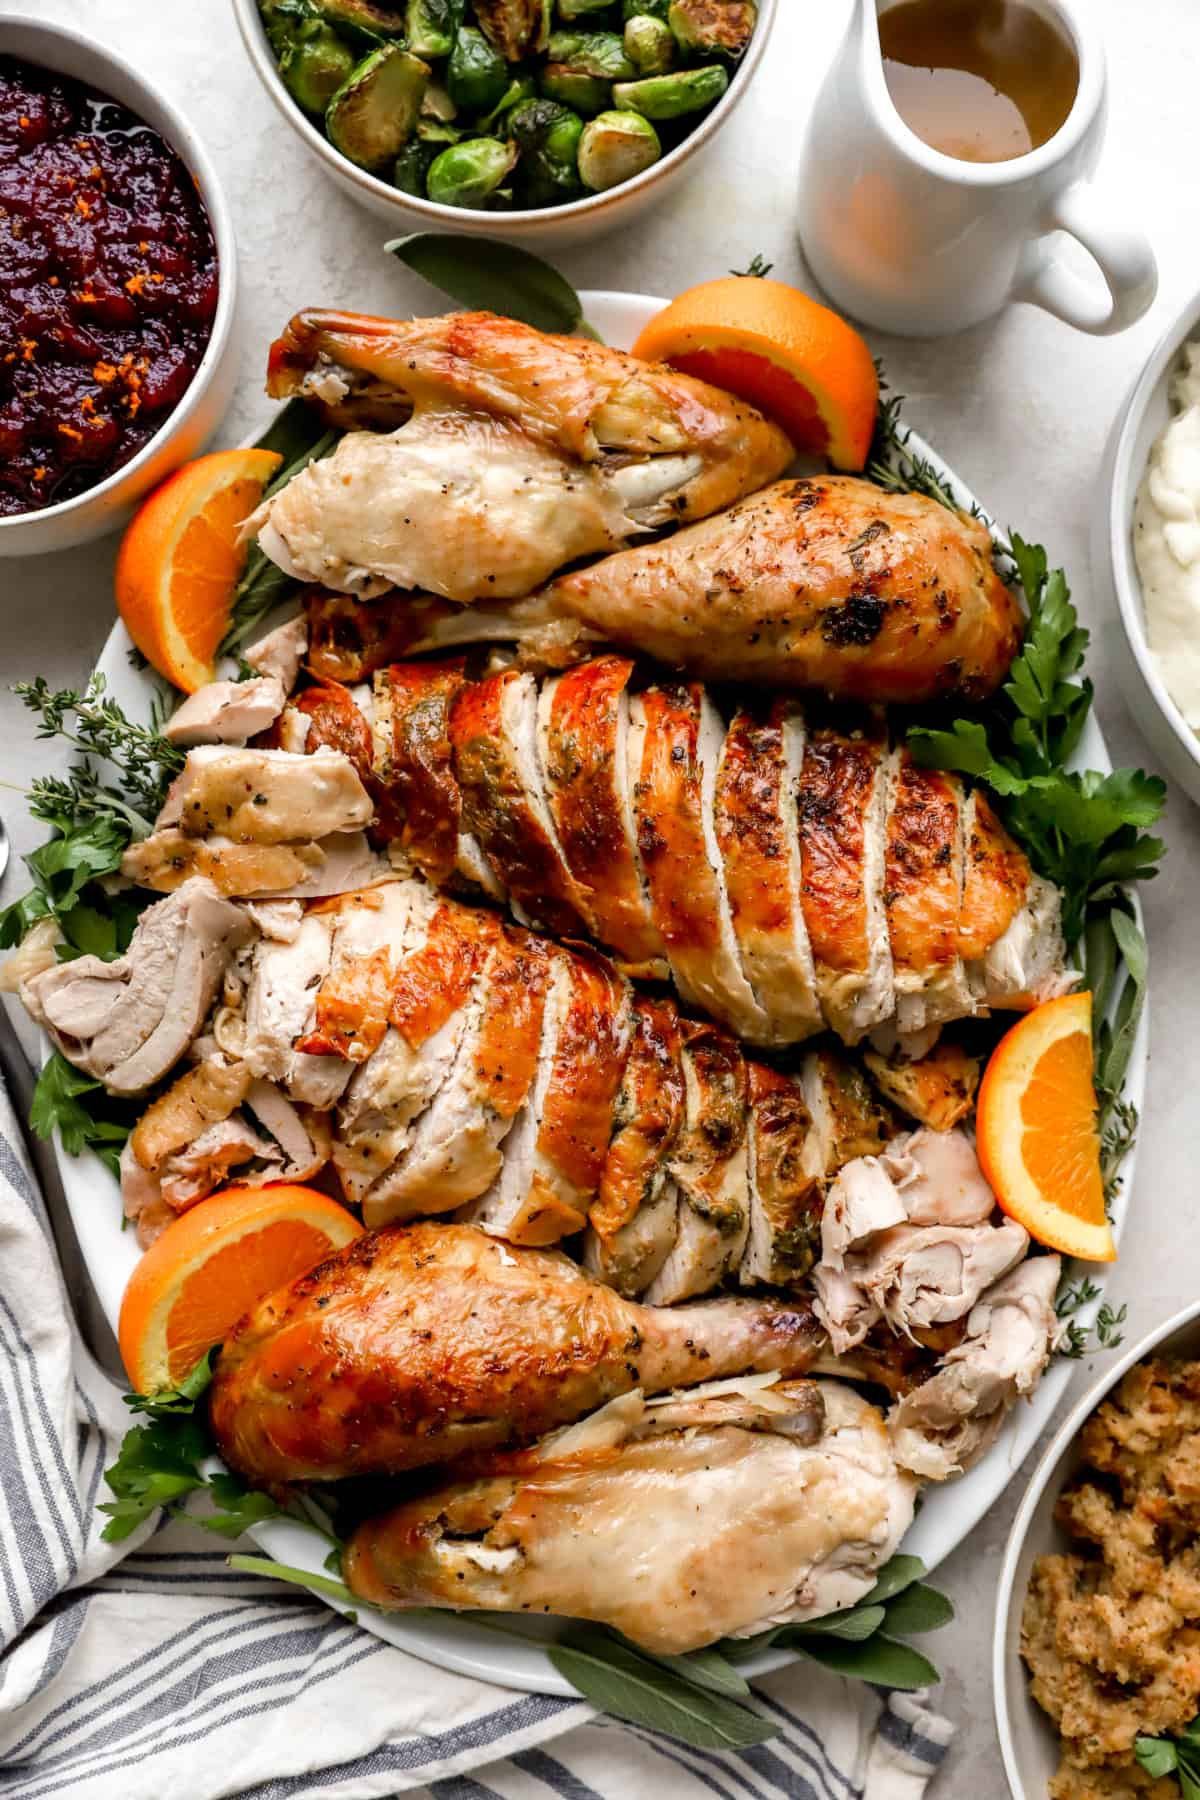 a sliced Thanksgiving turkey presented on a platter with orange slices and greens from above.